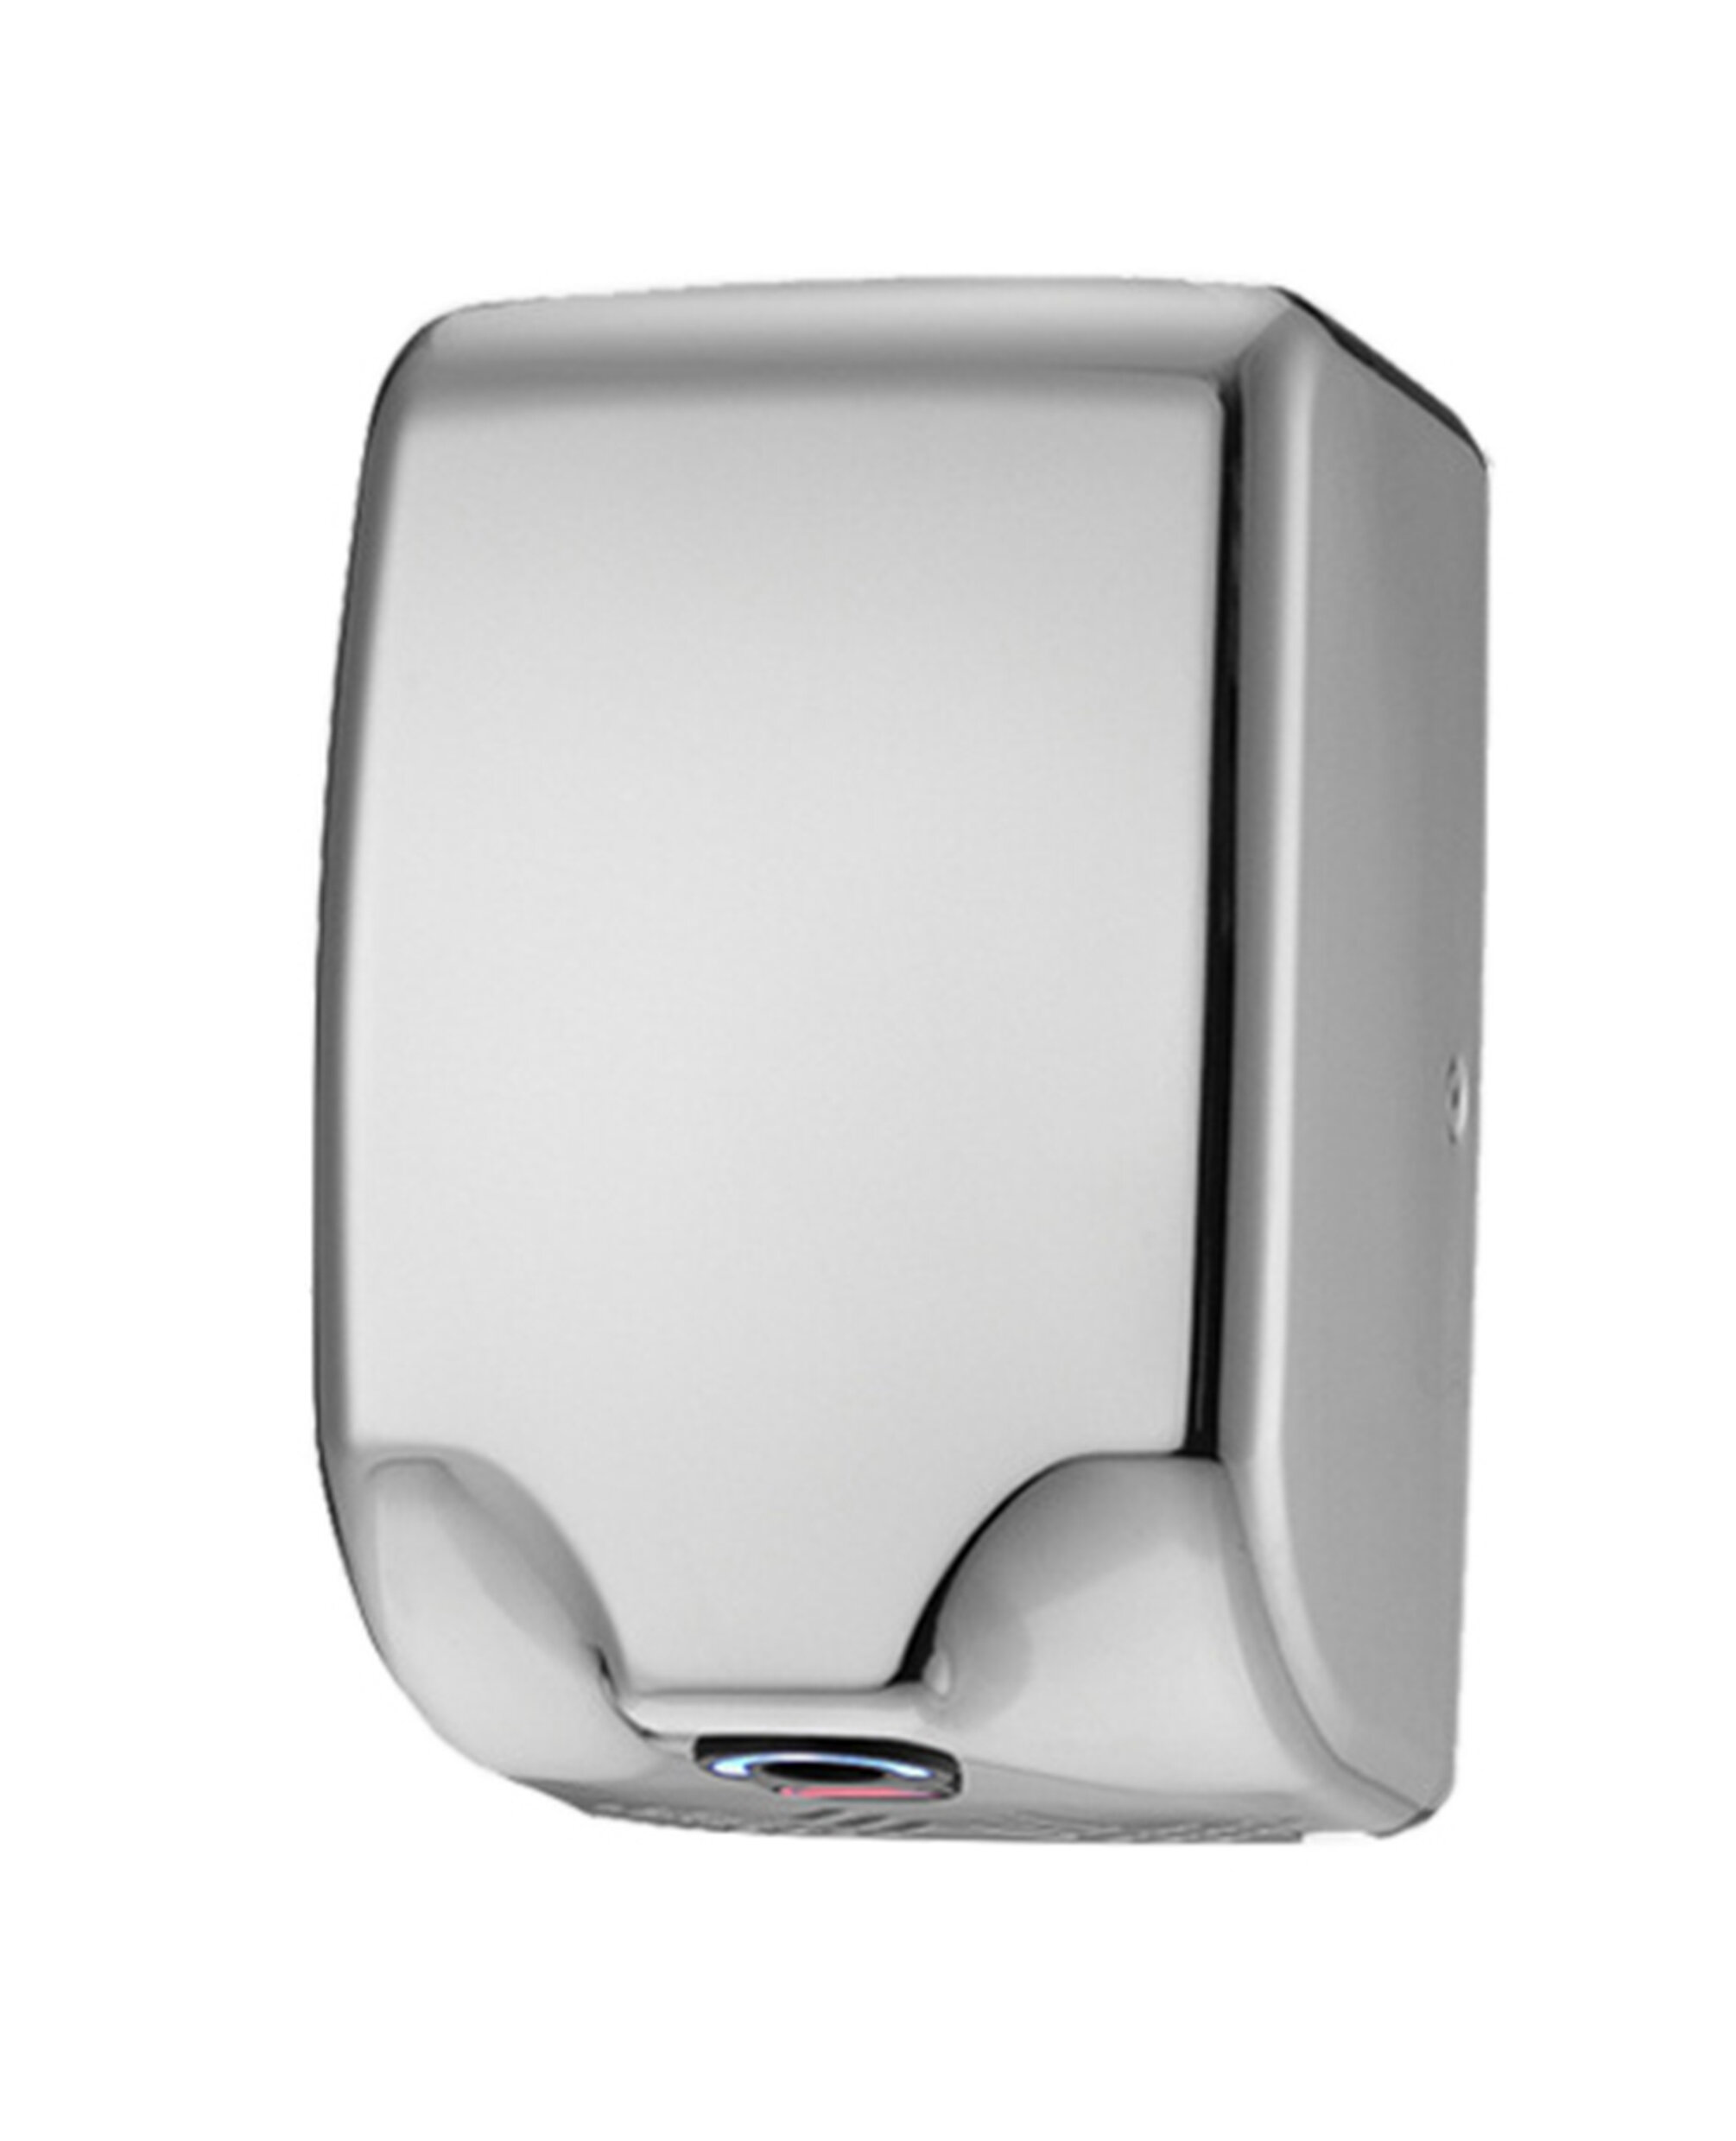 FixtureDisplays Bathroom Hand Dryer, Stainless Steel Cover Commercial Dryer  224Mph Automatic High Speed Heavy Duty Wayfair